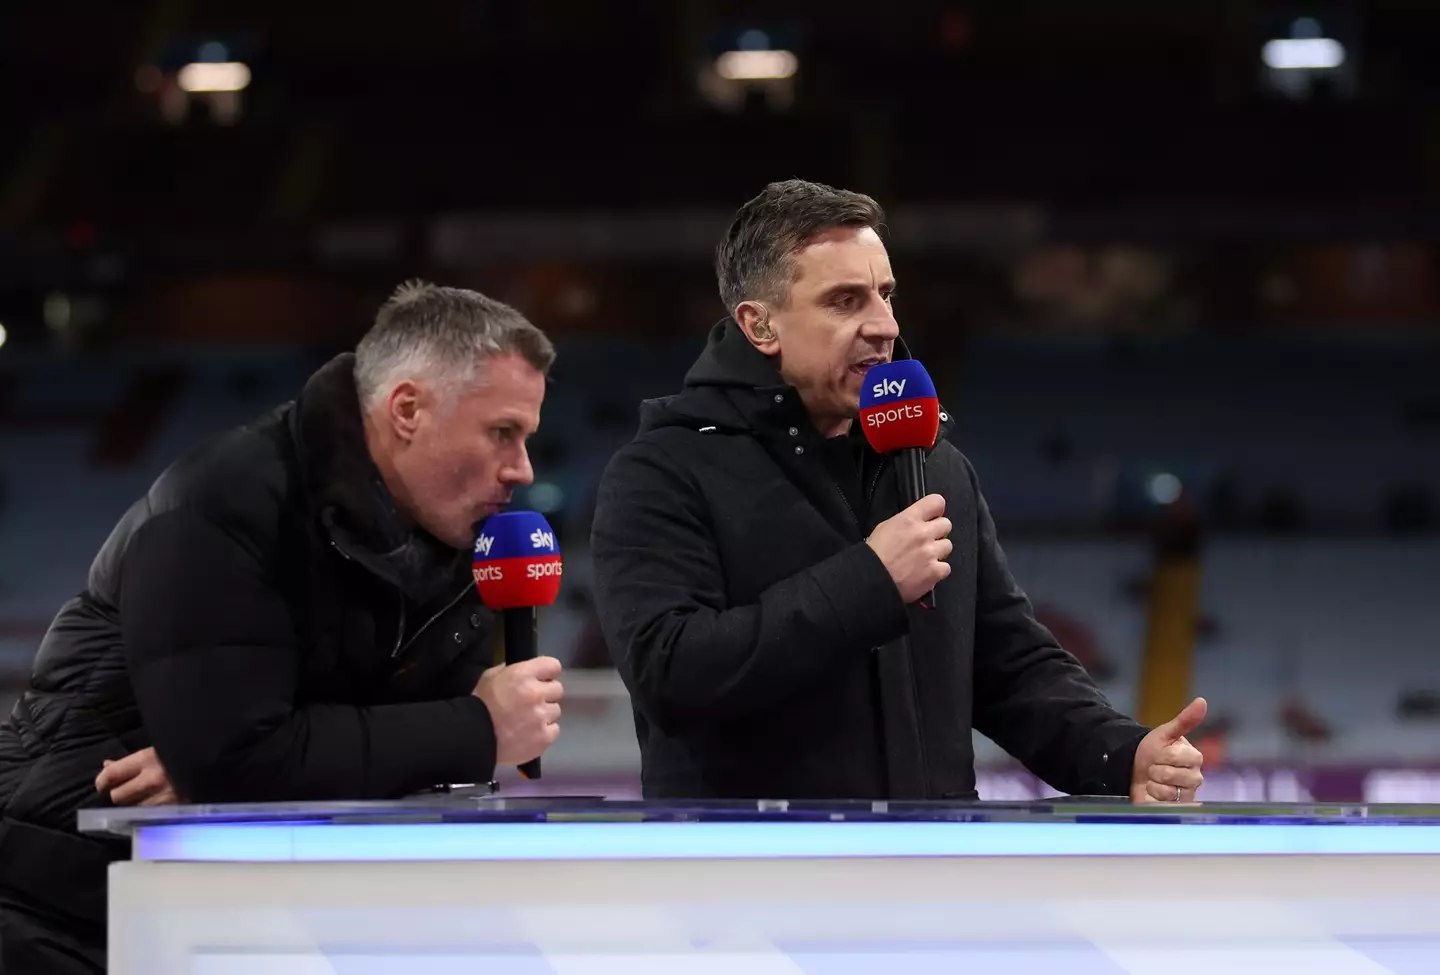 Gary Neville and Jamie Carragher during a Sky Sports broadcast. Image: Getty